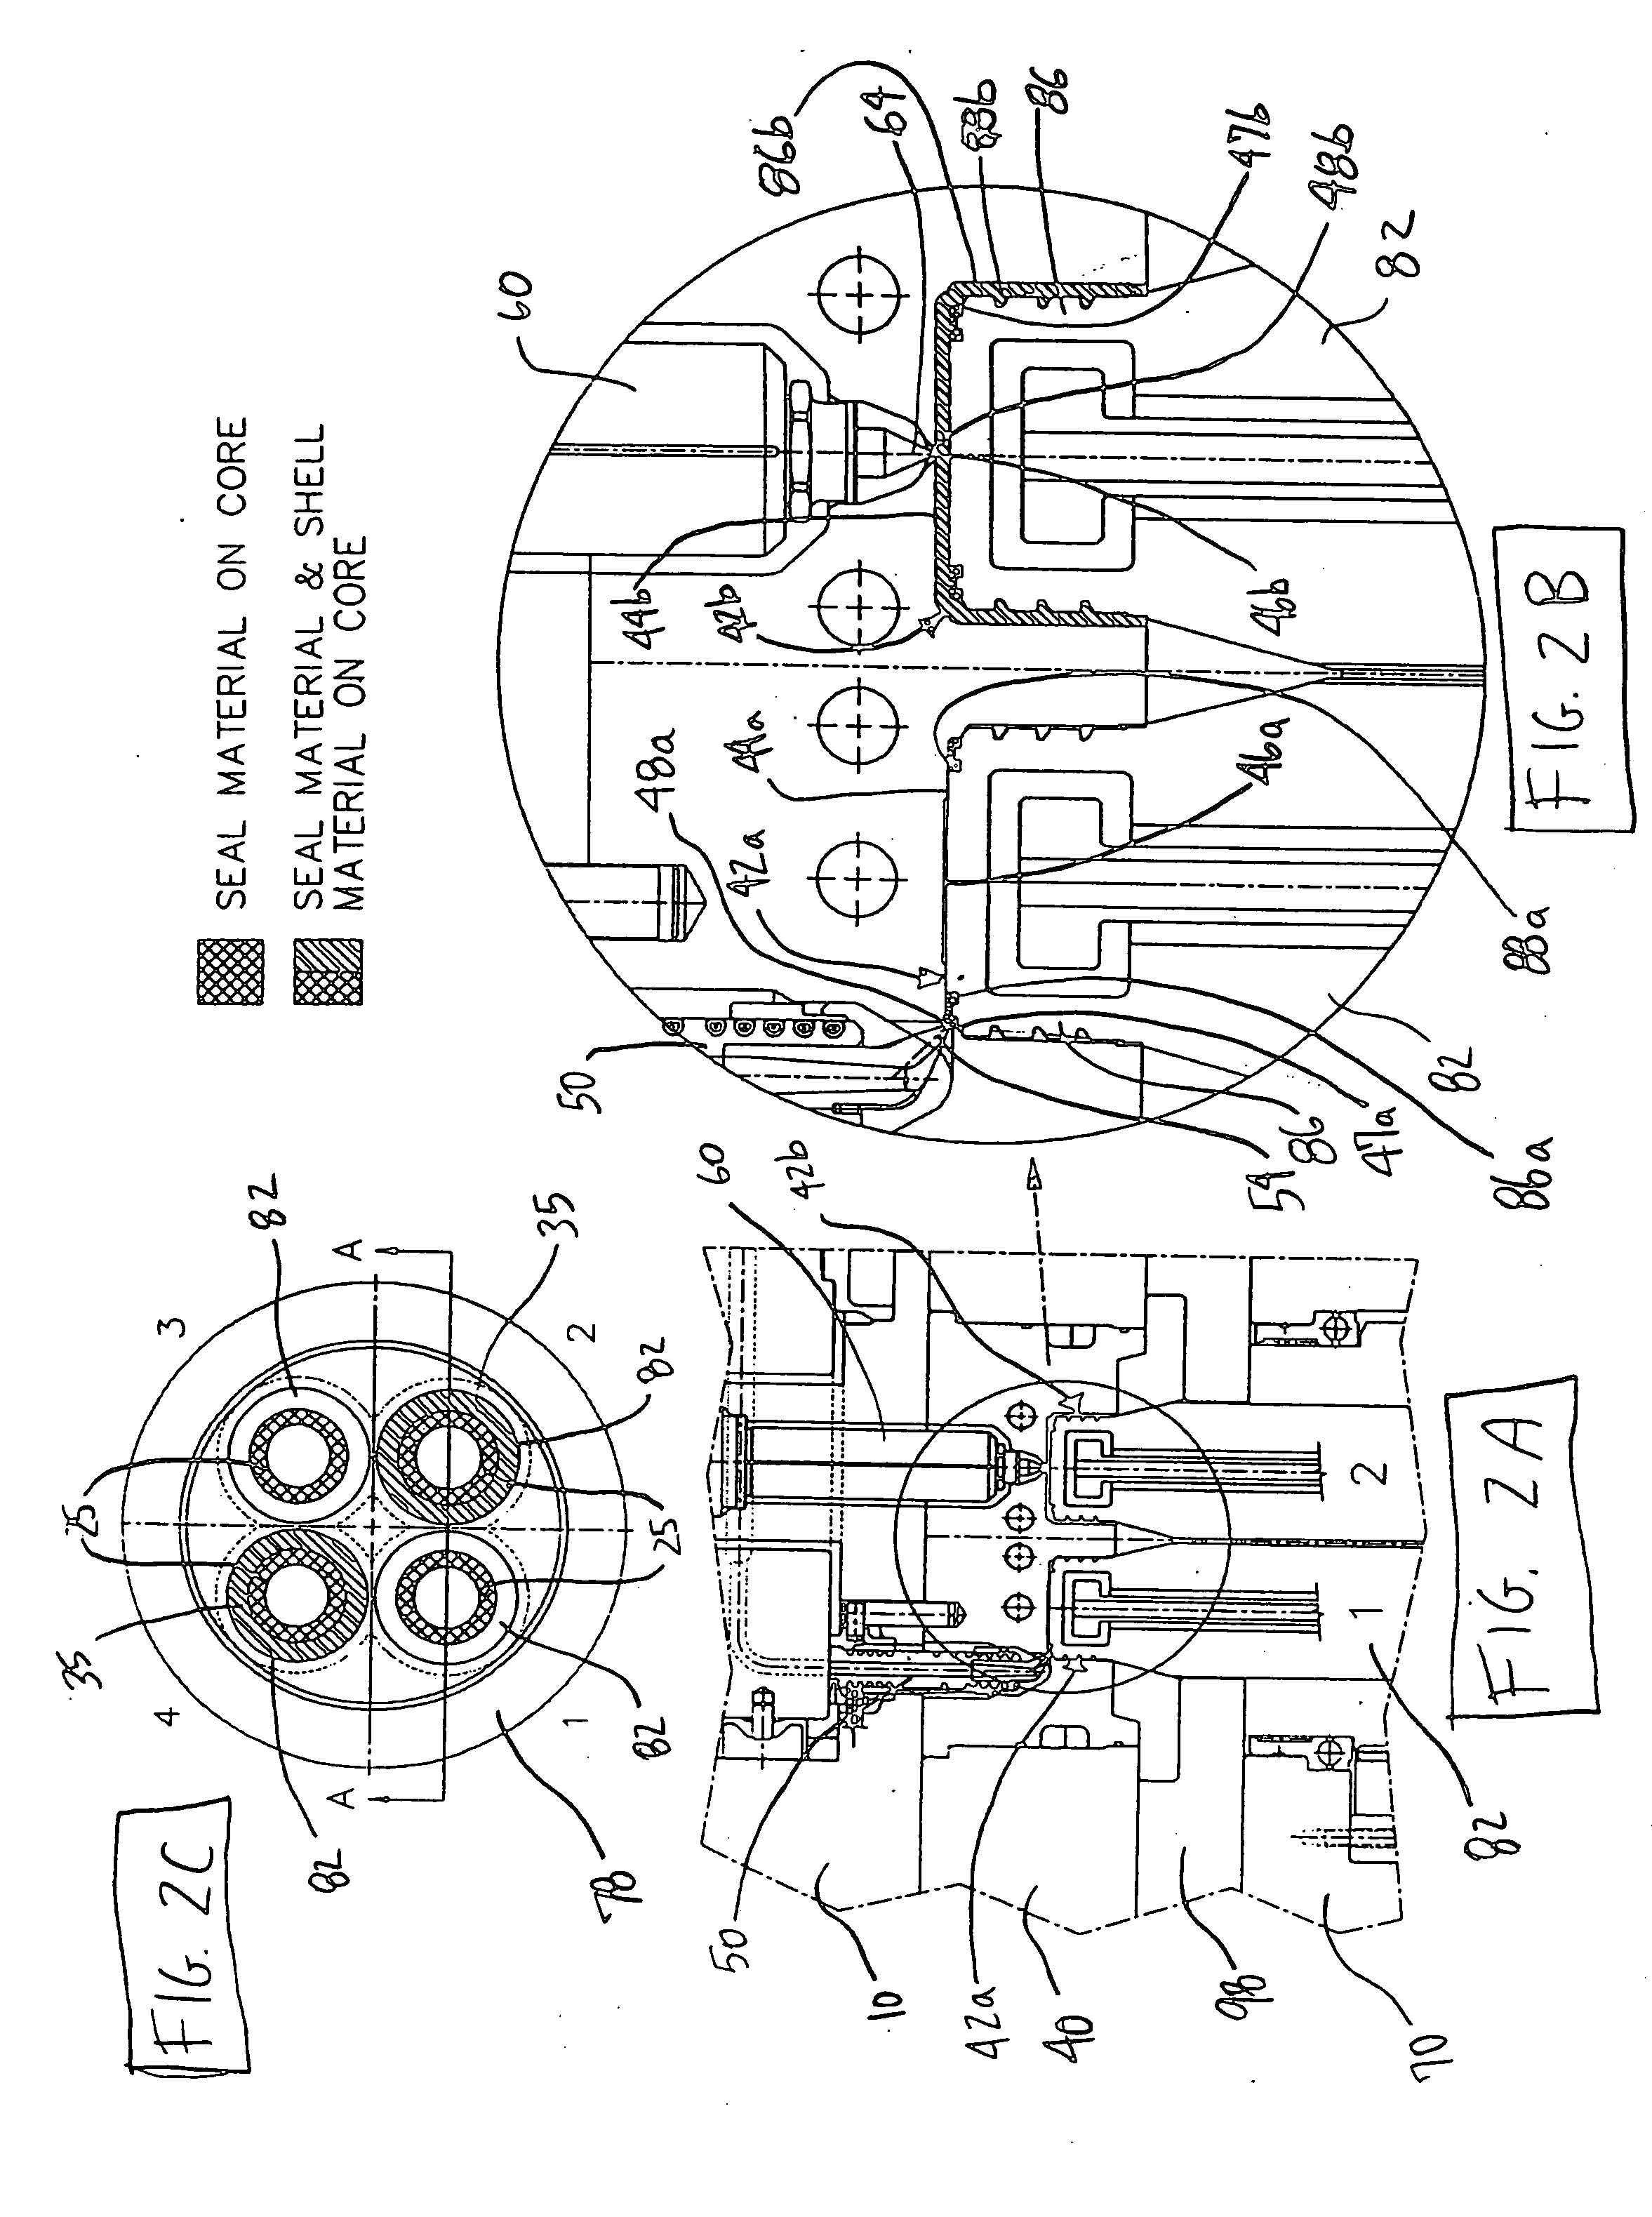 Two position double injection molding apparatus and method